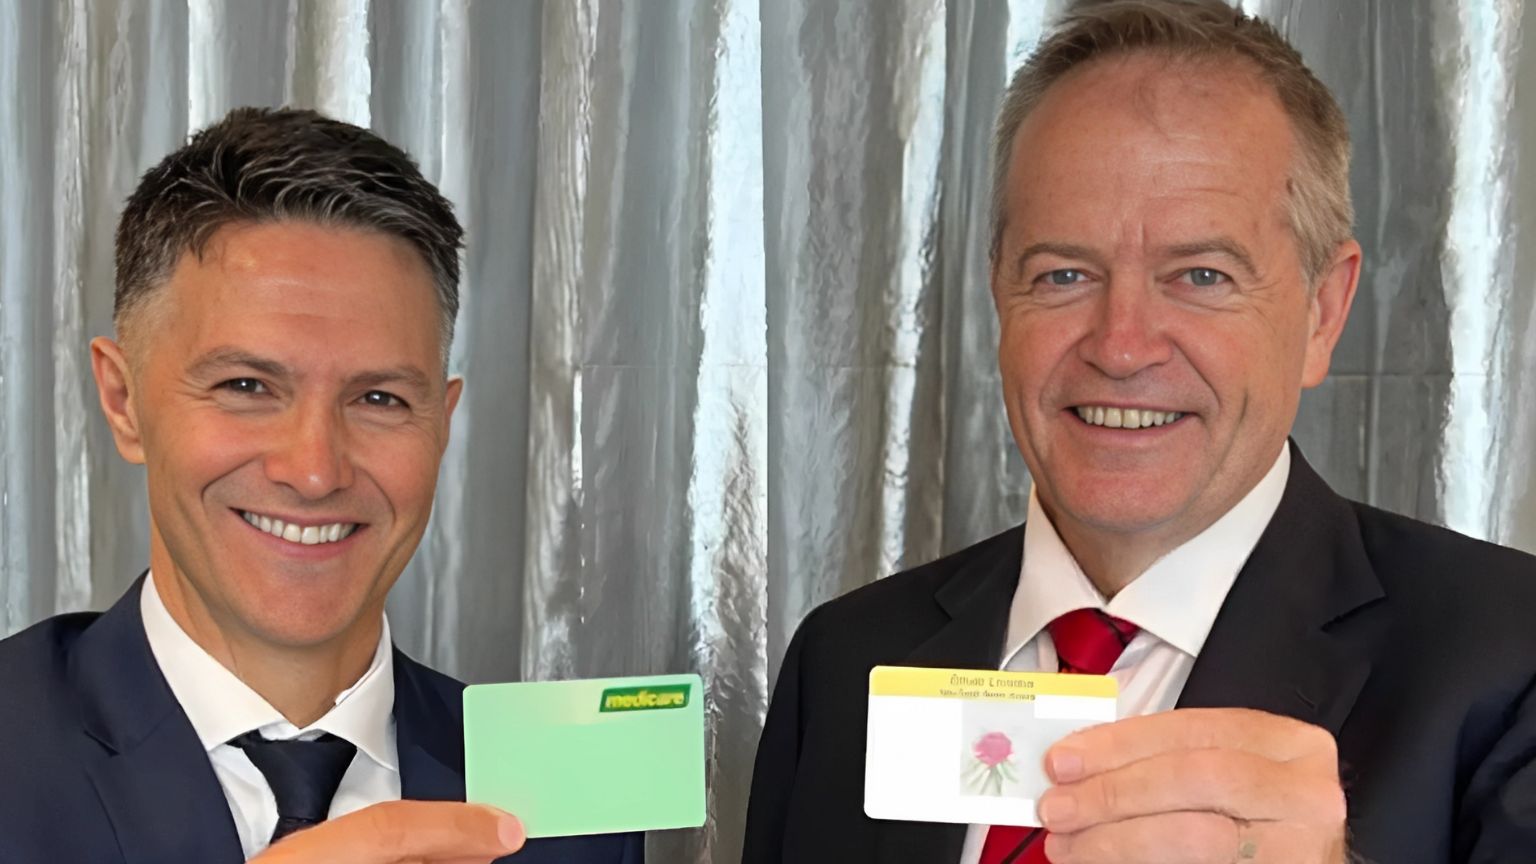 Australia agrees on digital ID rollout and data sharing